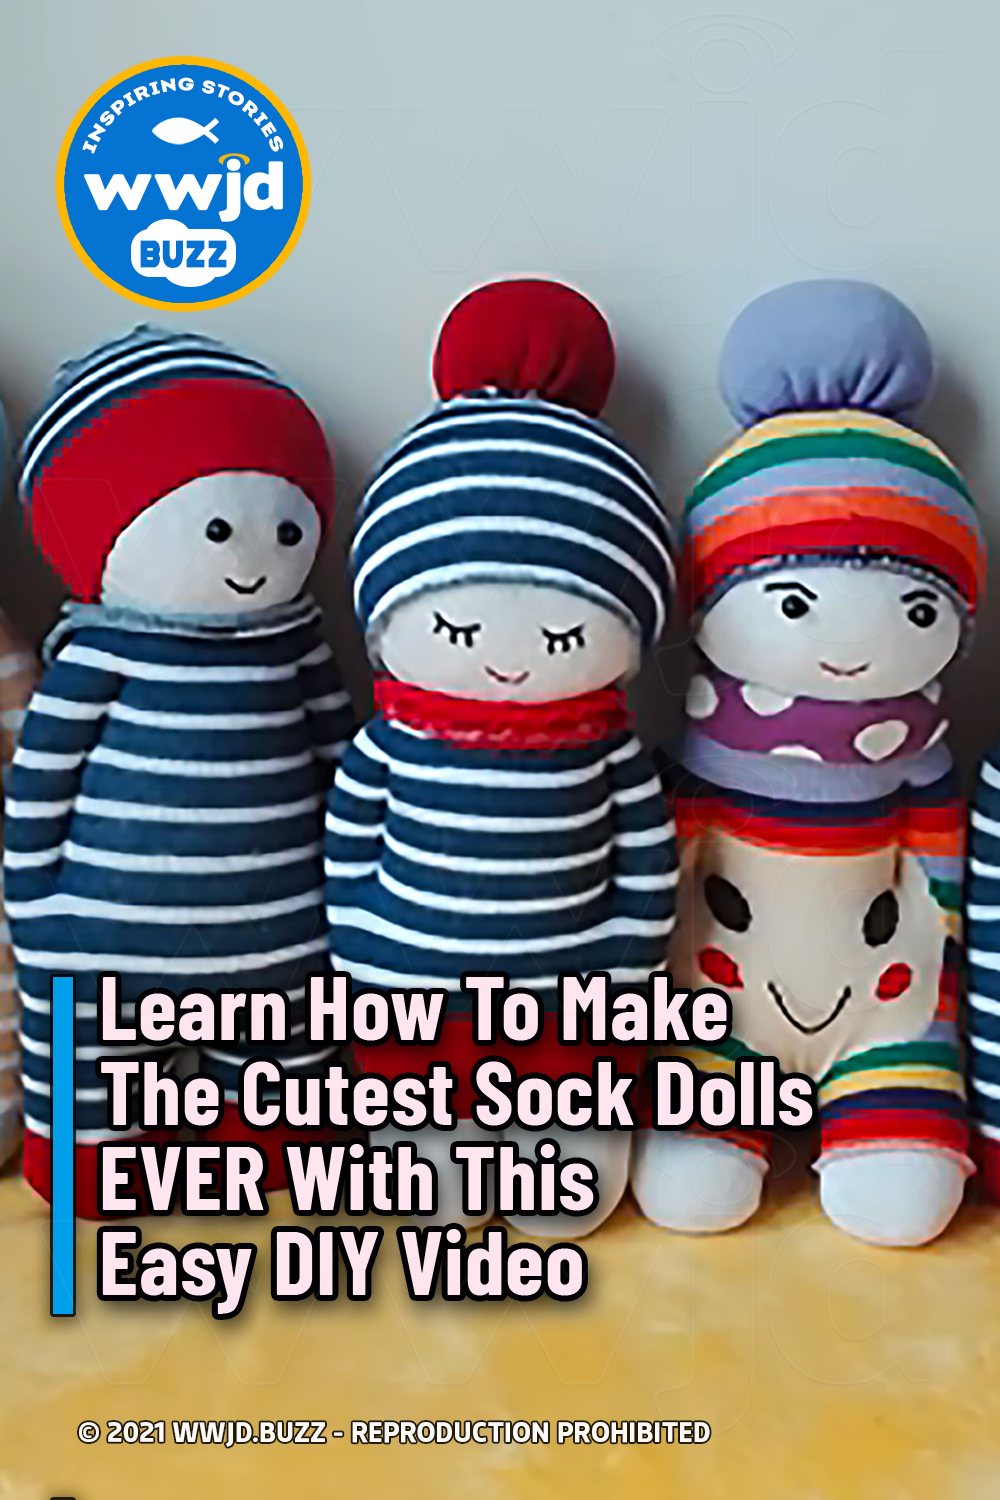 Learn How To Make The Cutest Sock Dolls EVER With This Easy DIY Video